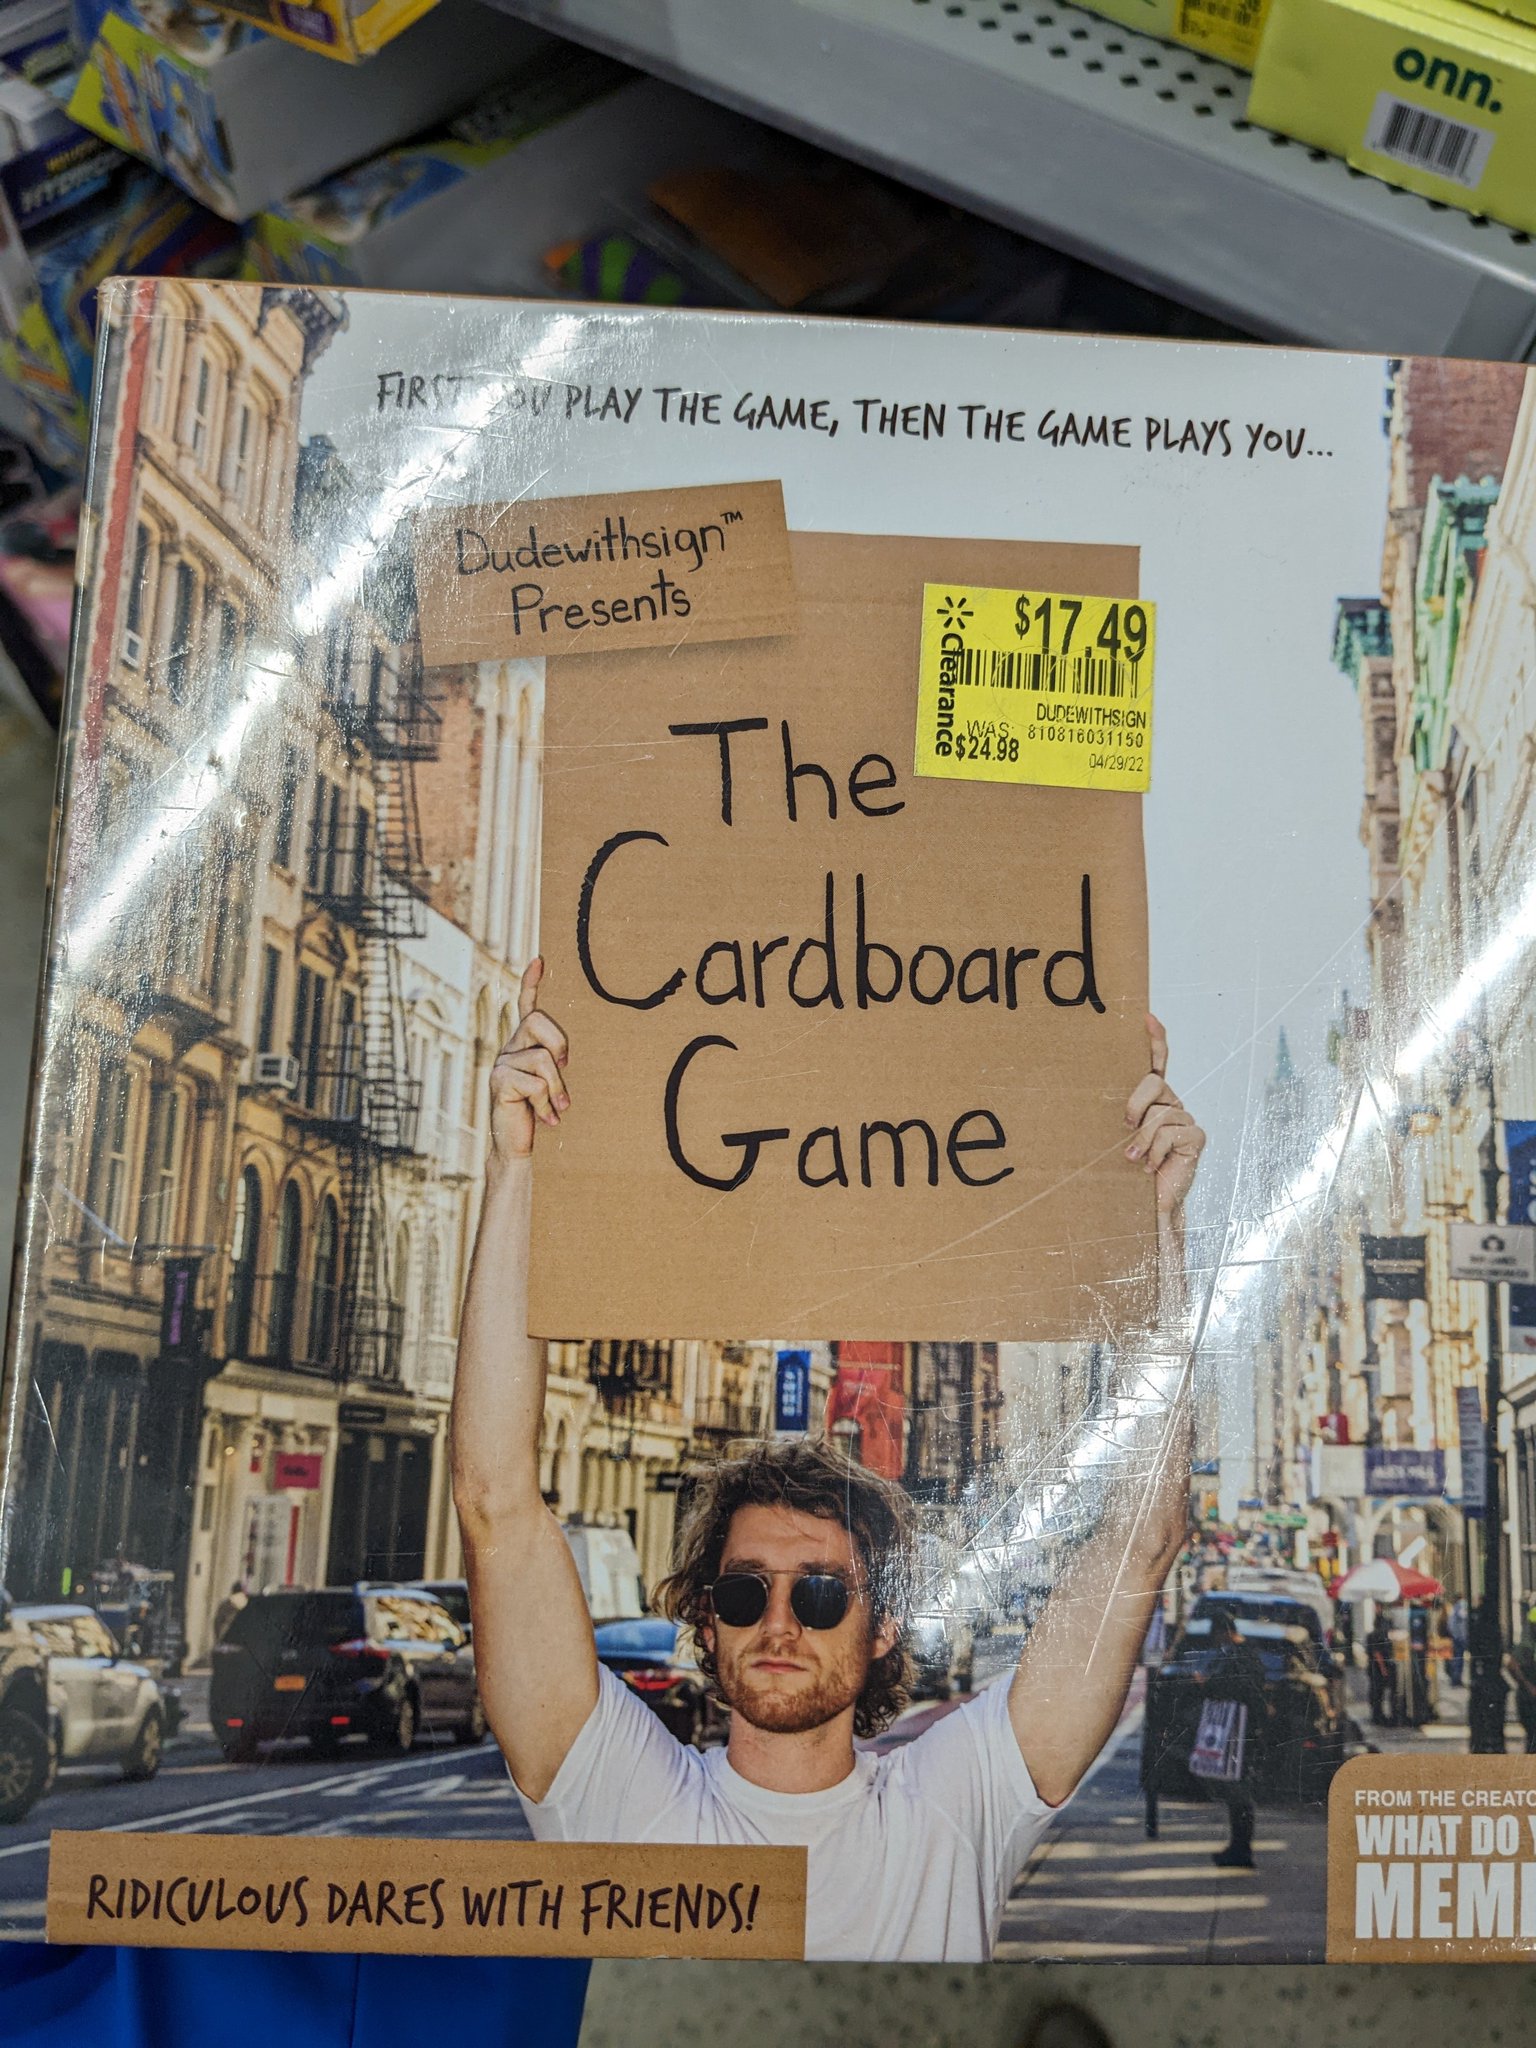 Jeremy Horpedahl 🤷‍♂️ on X: The guy holding cardboard sign meme is now  a game  / X